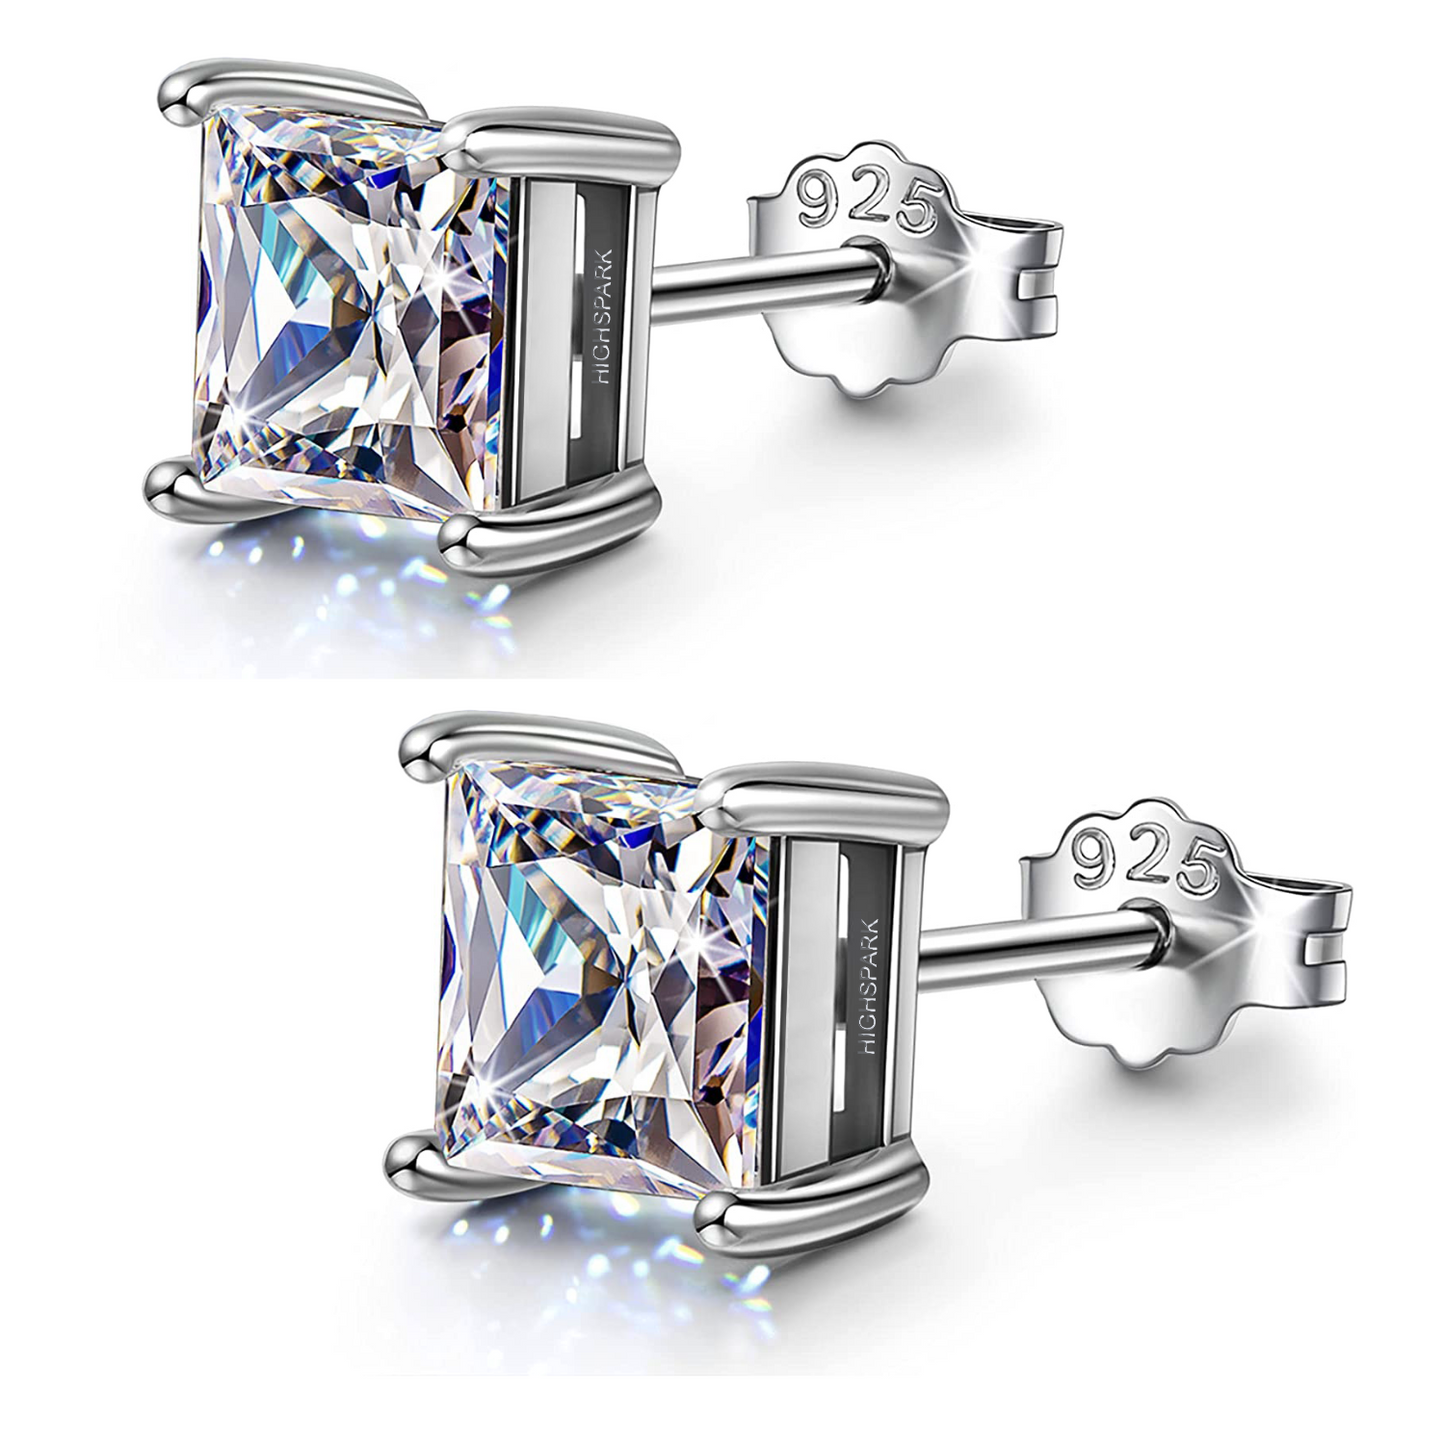 Square Solitaire Earrings in 92.5 Silver embellished with Princess Cut Swarovski Zirconia